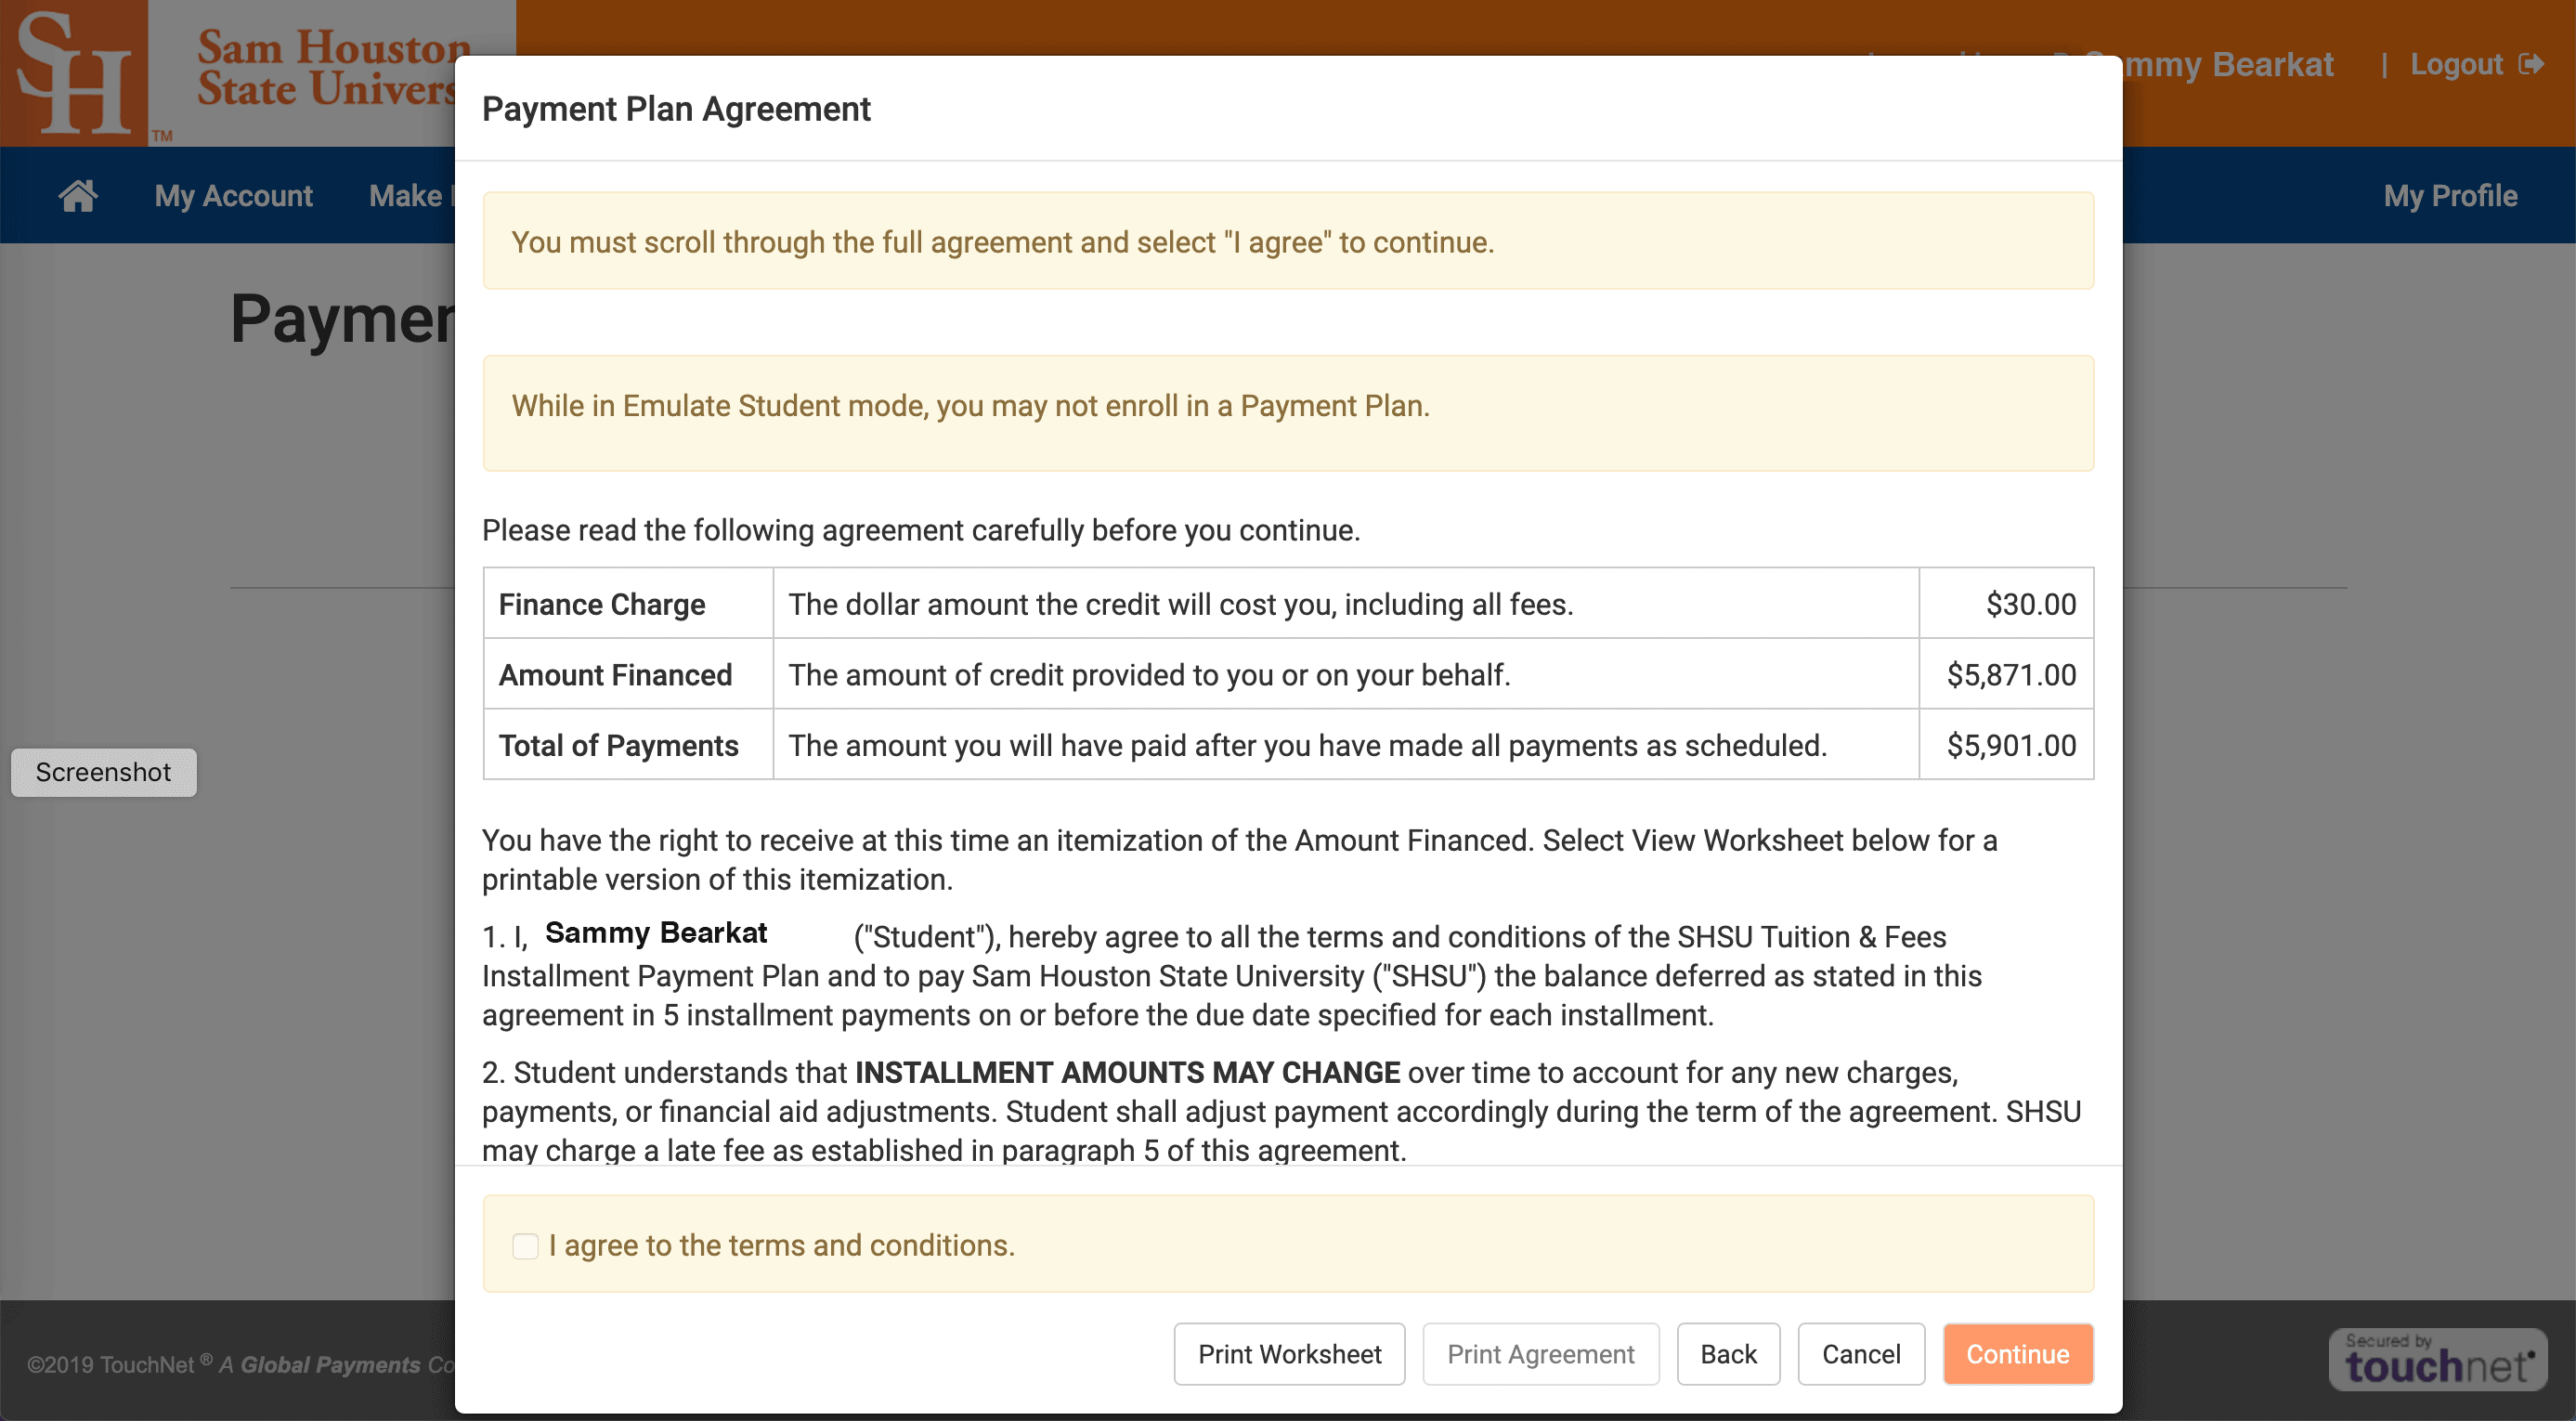 click the orange select button on the desired plan option